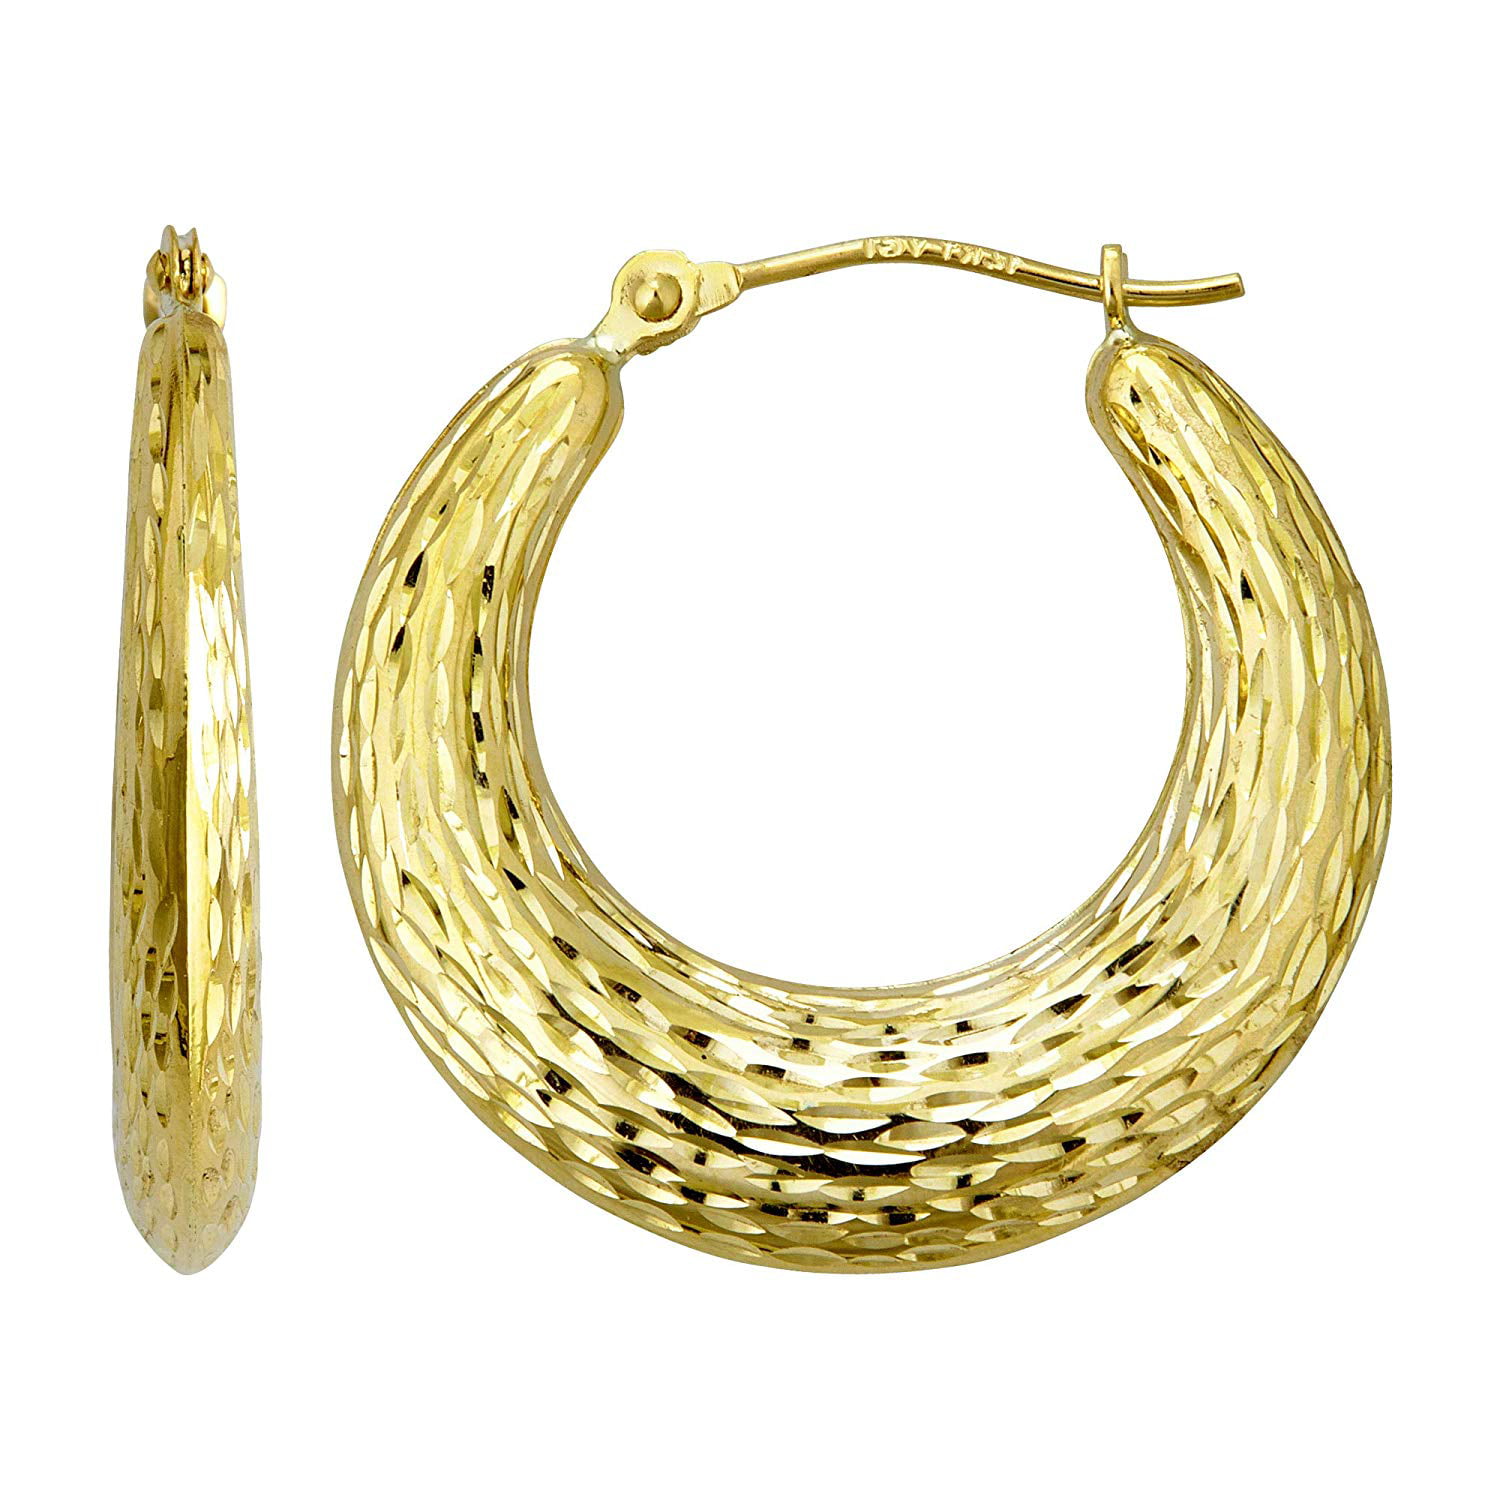 Decadence - 14K Gold Thick Round Hoop Earrings with Hinged Clasp For ...